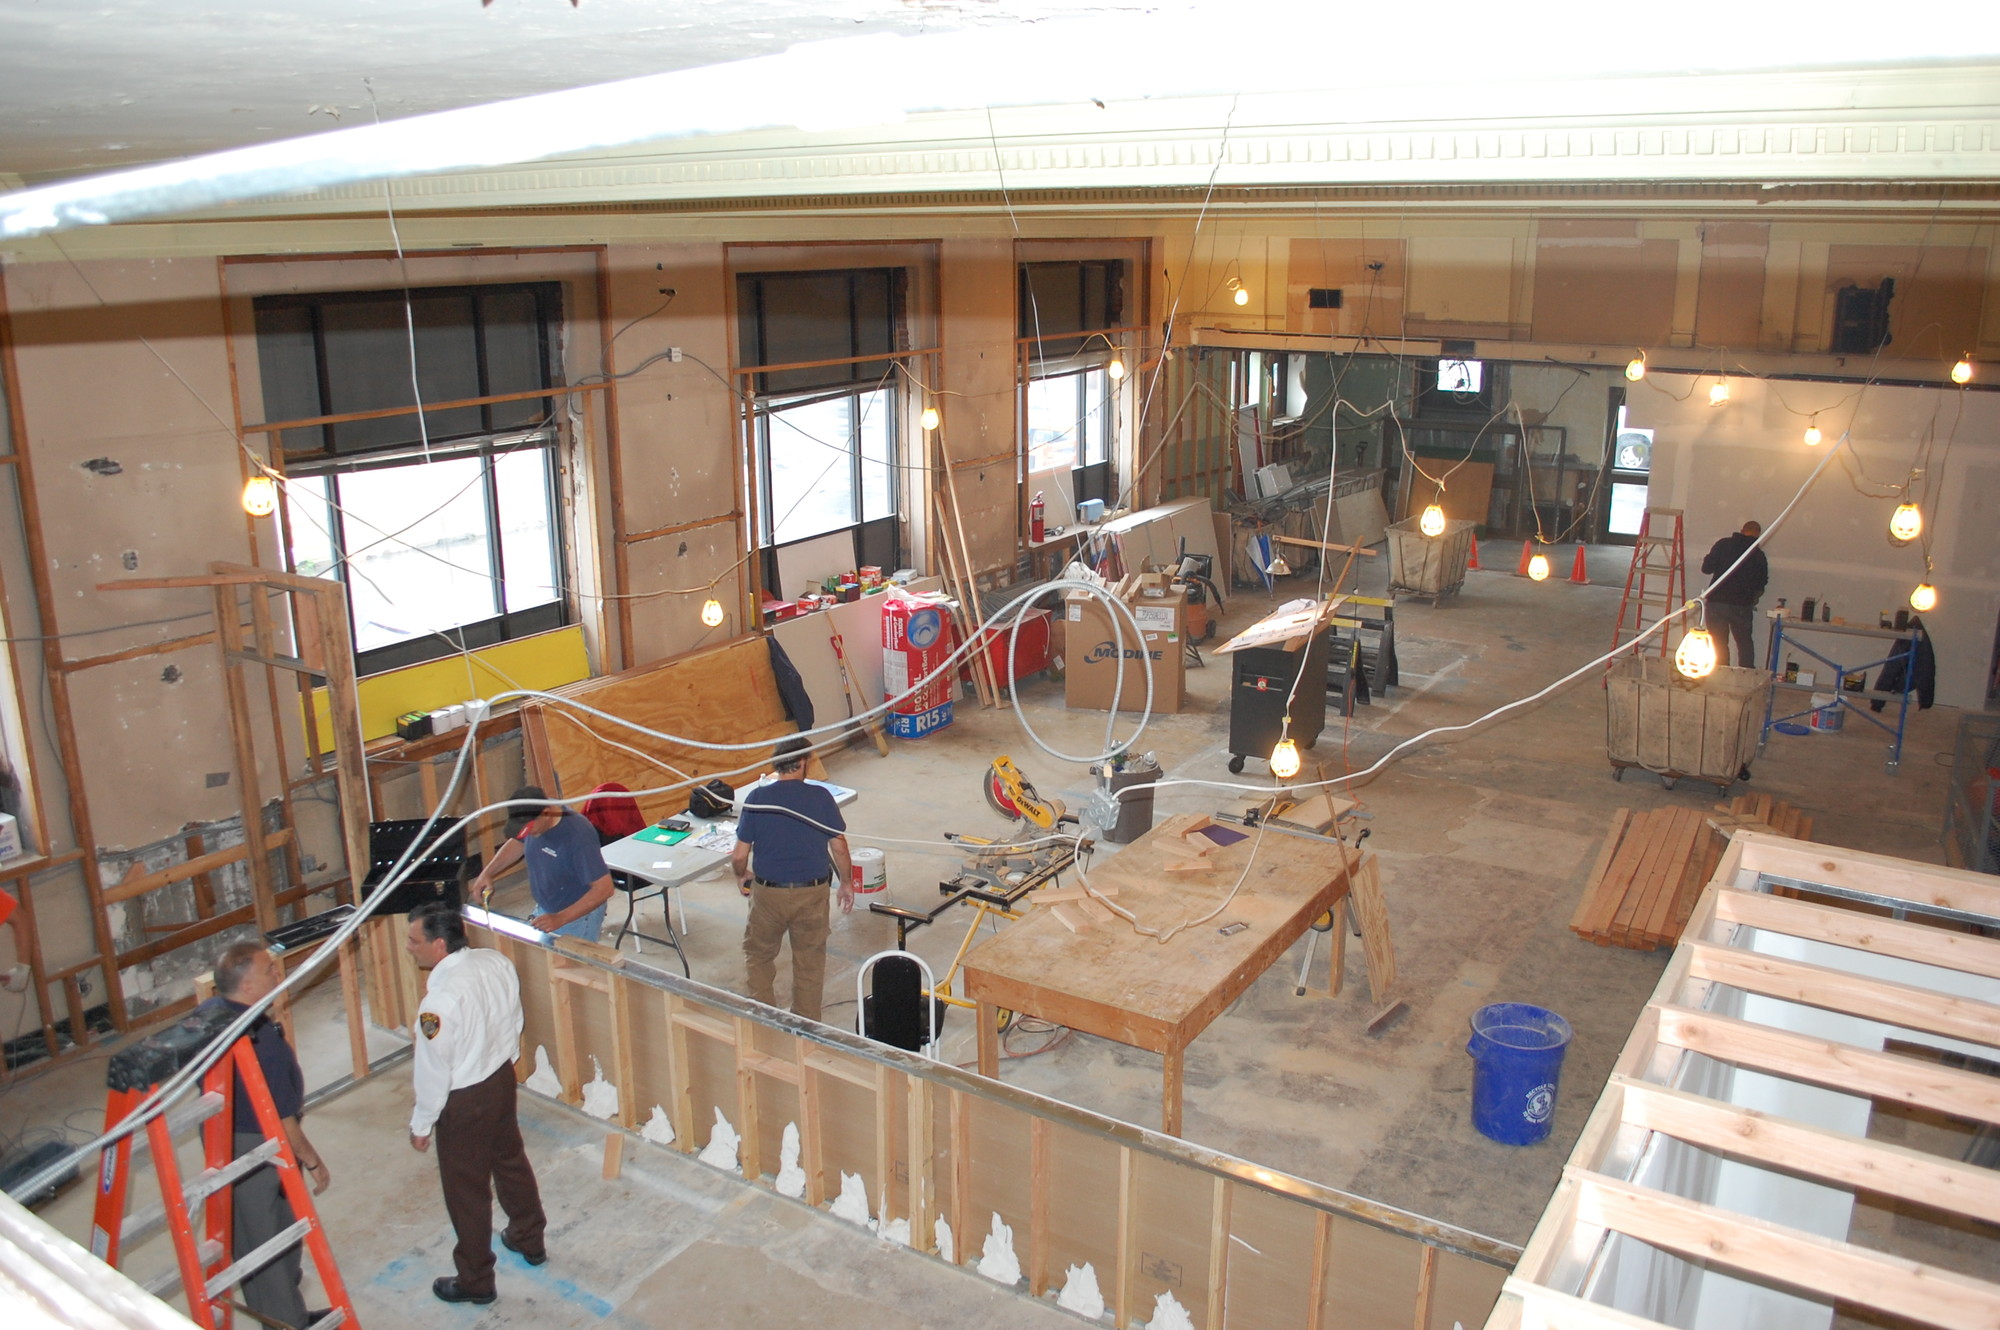 A view of the courthouse construction from the mezzanine level, where the judge’s chambers and a conference room will be located.